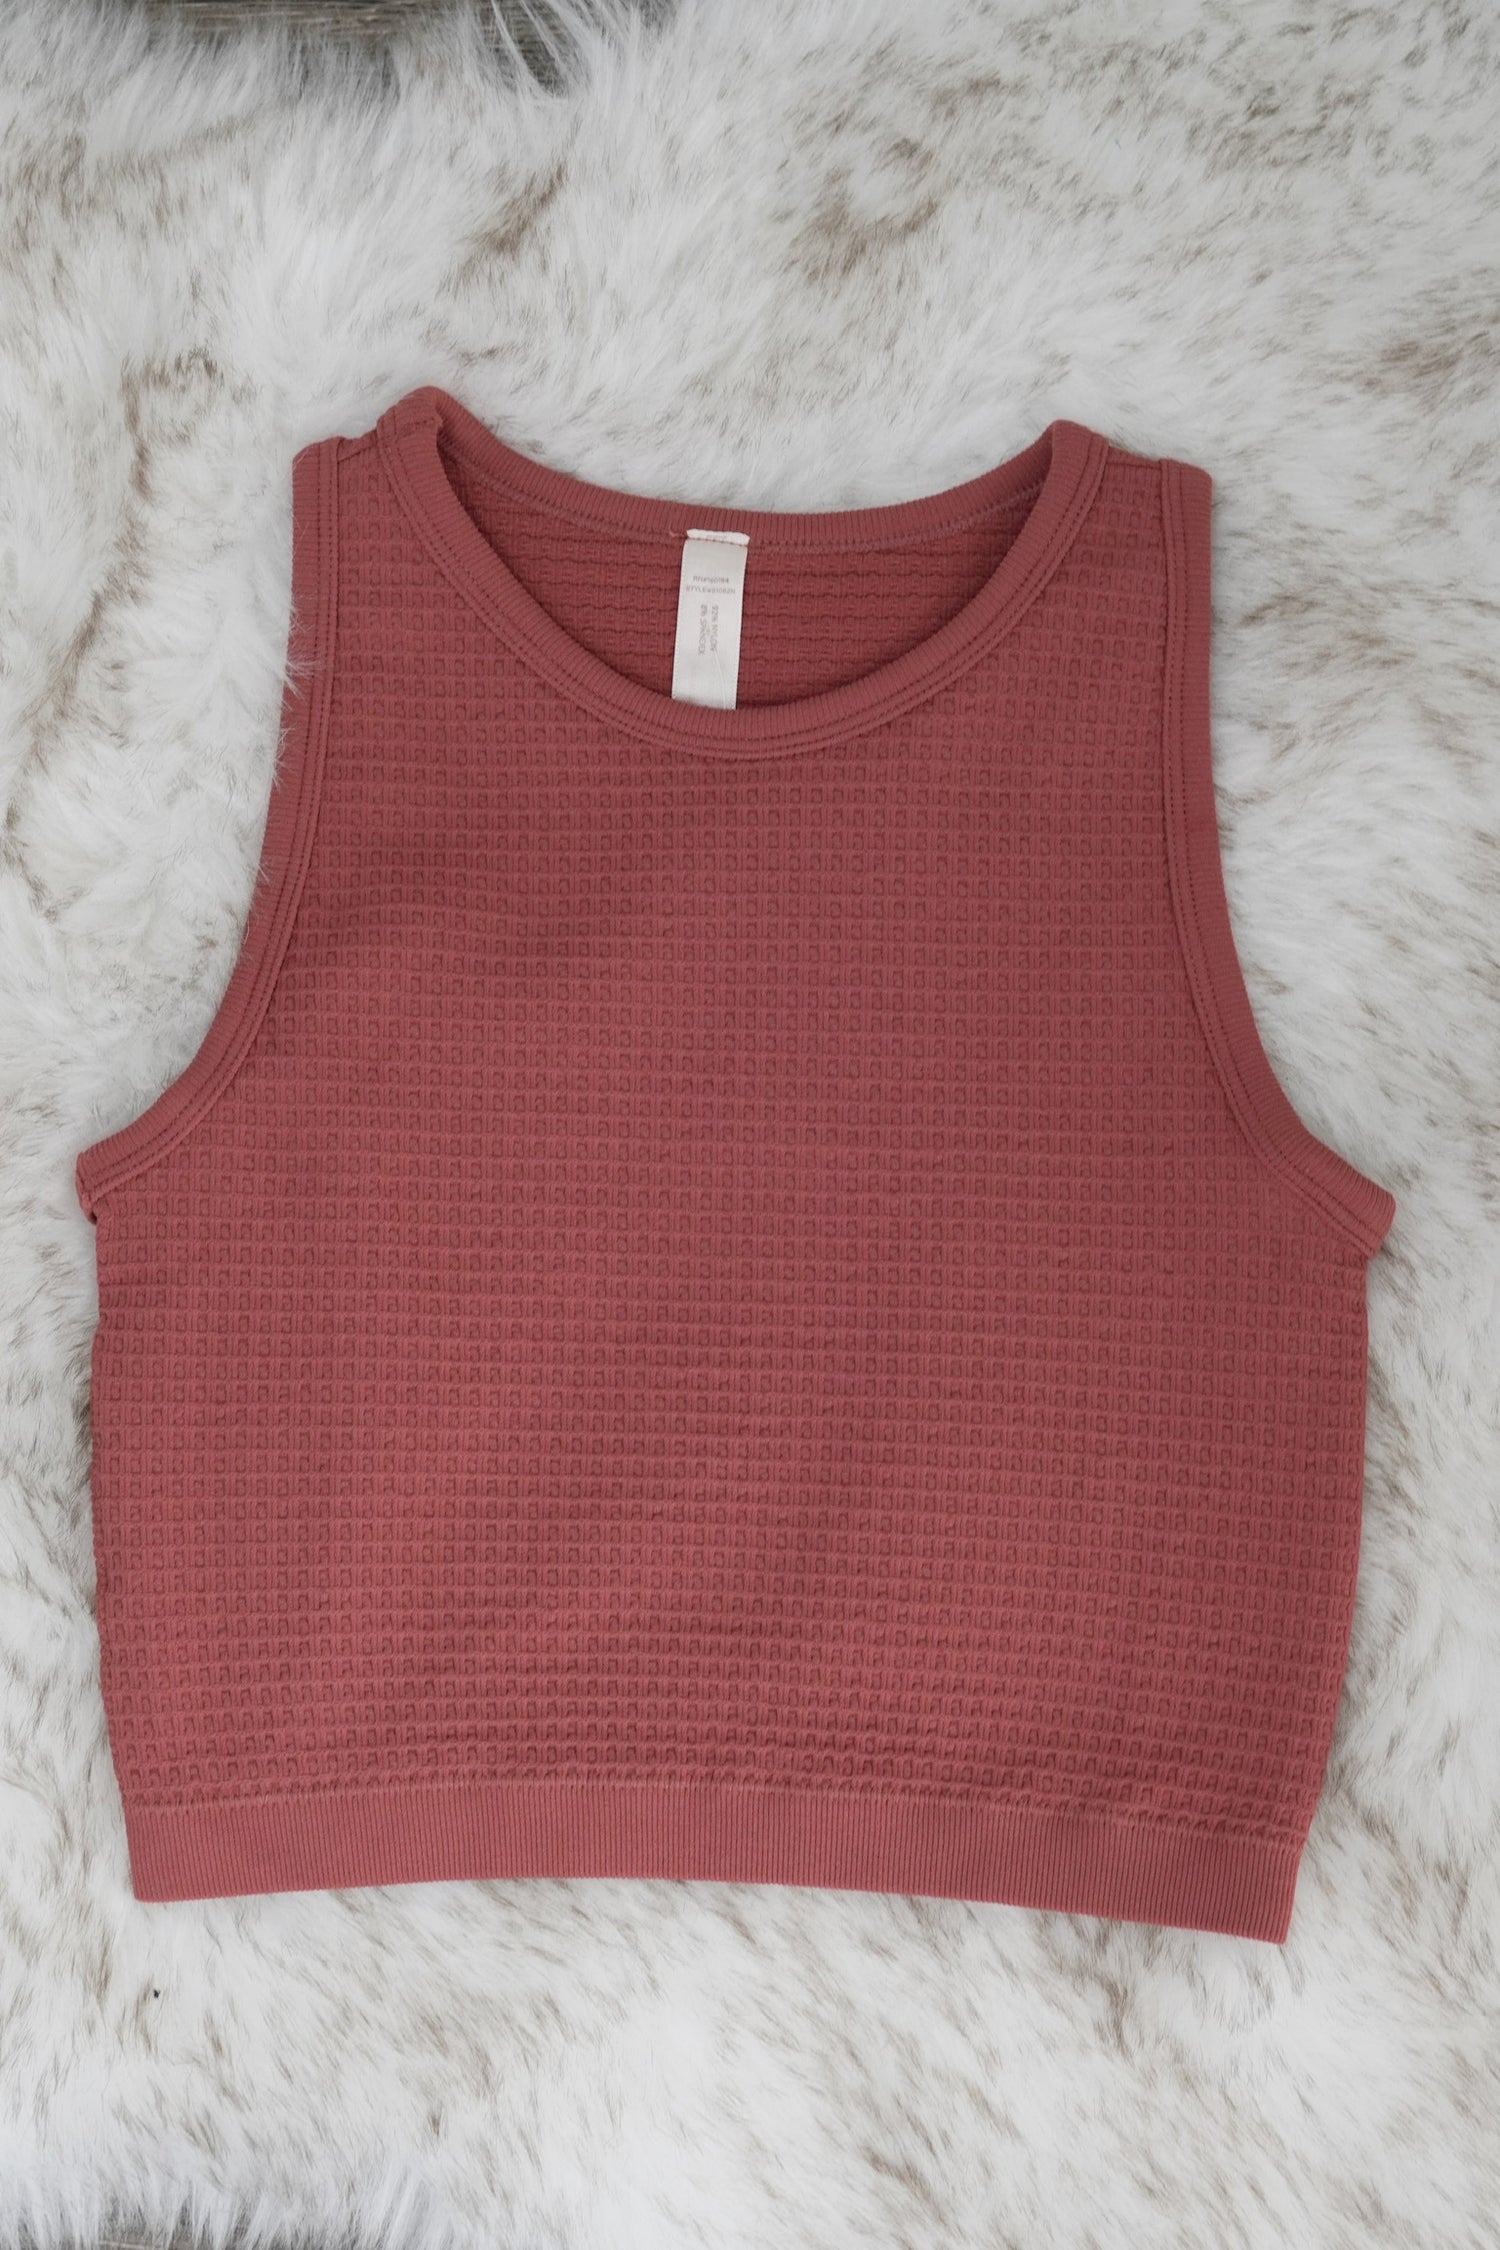 Tulla Textured Tank Top Round Neckline Sleeveless Textured Material Colors: Grapefruit Fitted Cropped 92% Nylon, 8% Spandex